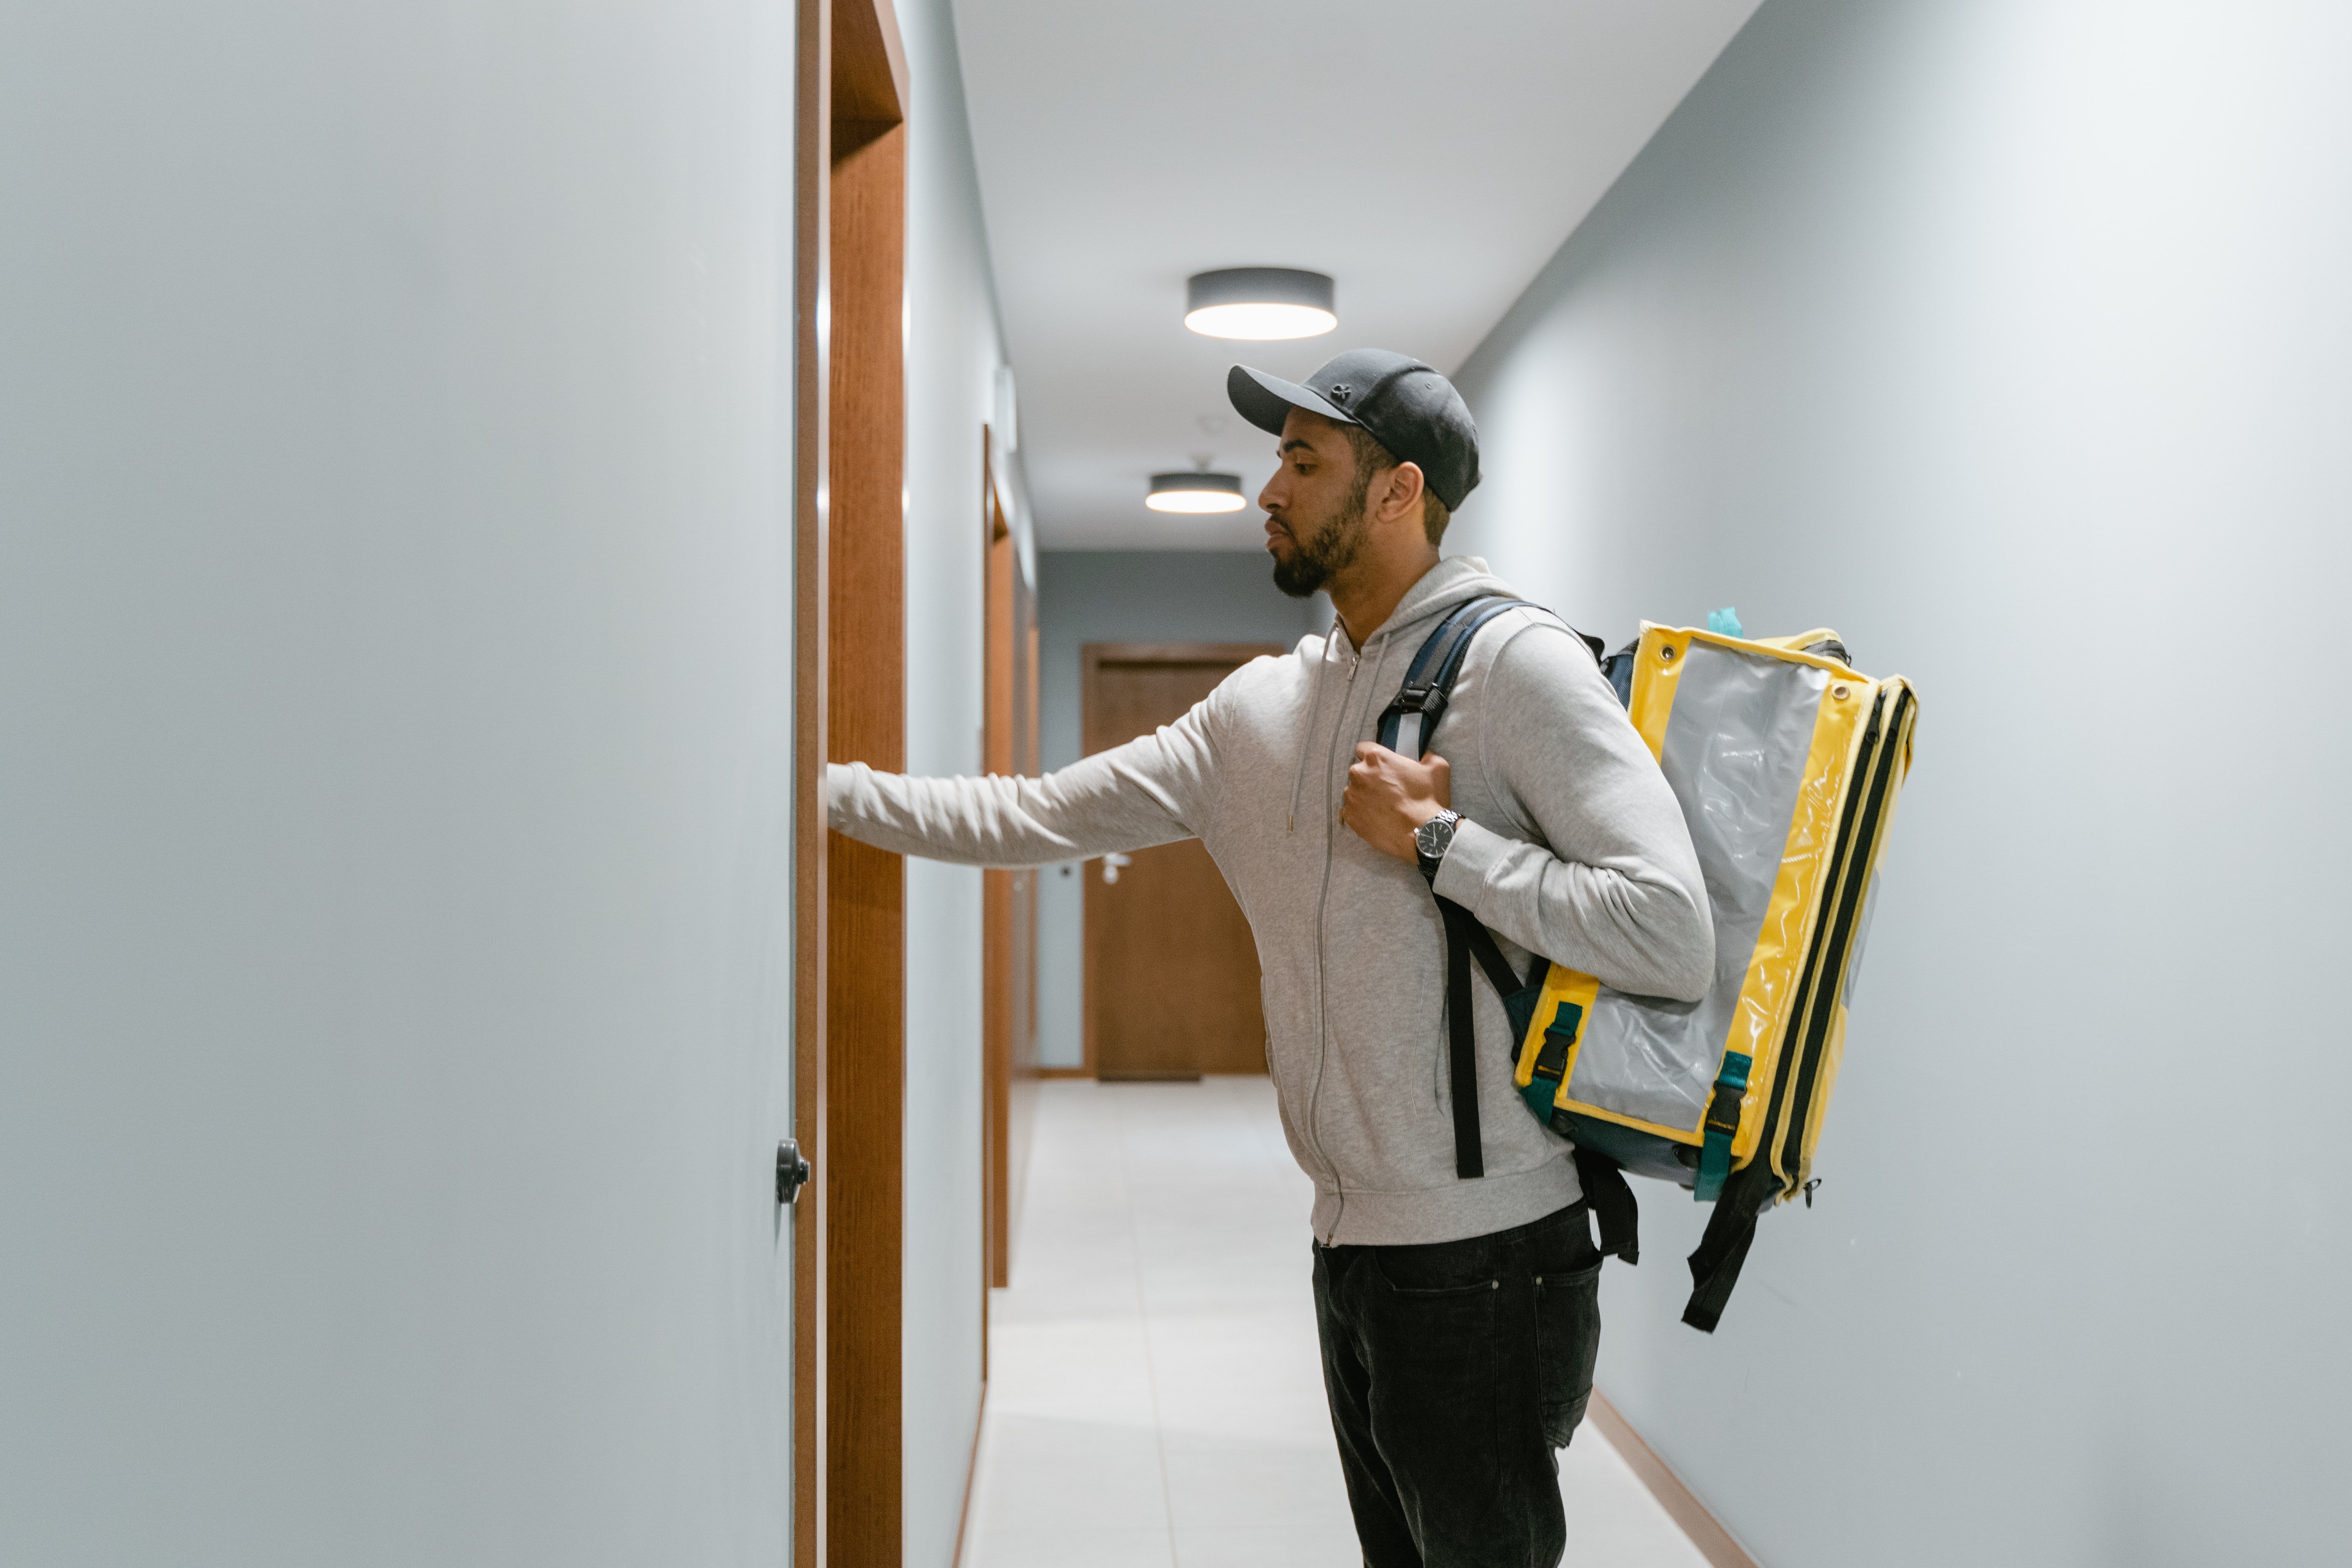 Delivery man knocking on a door | Photo: Pexels